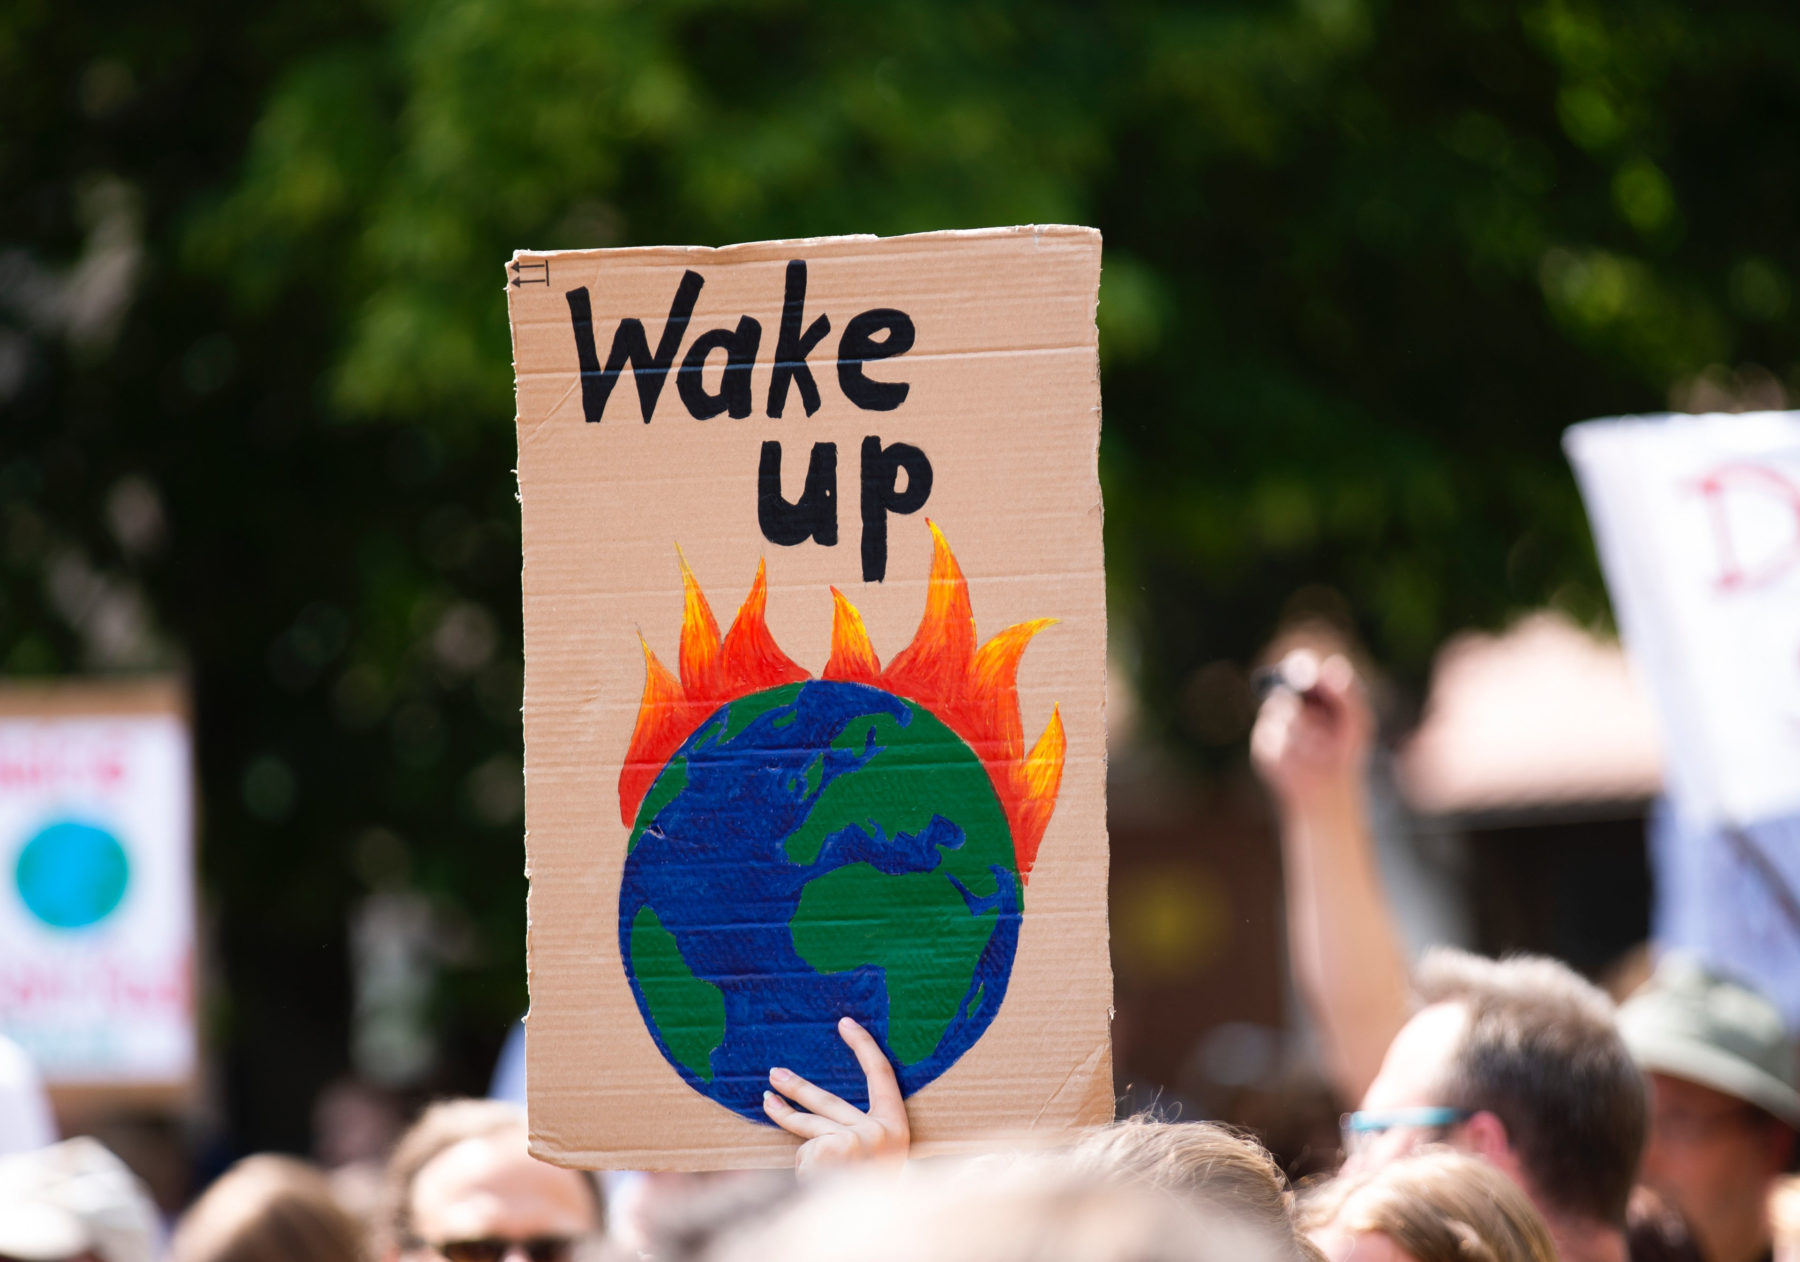 A person at a protest holding a placard with the words "wake up' on it.